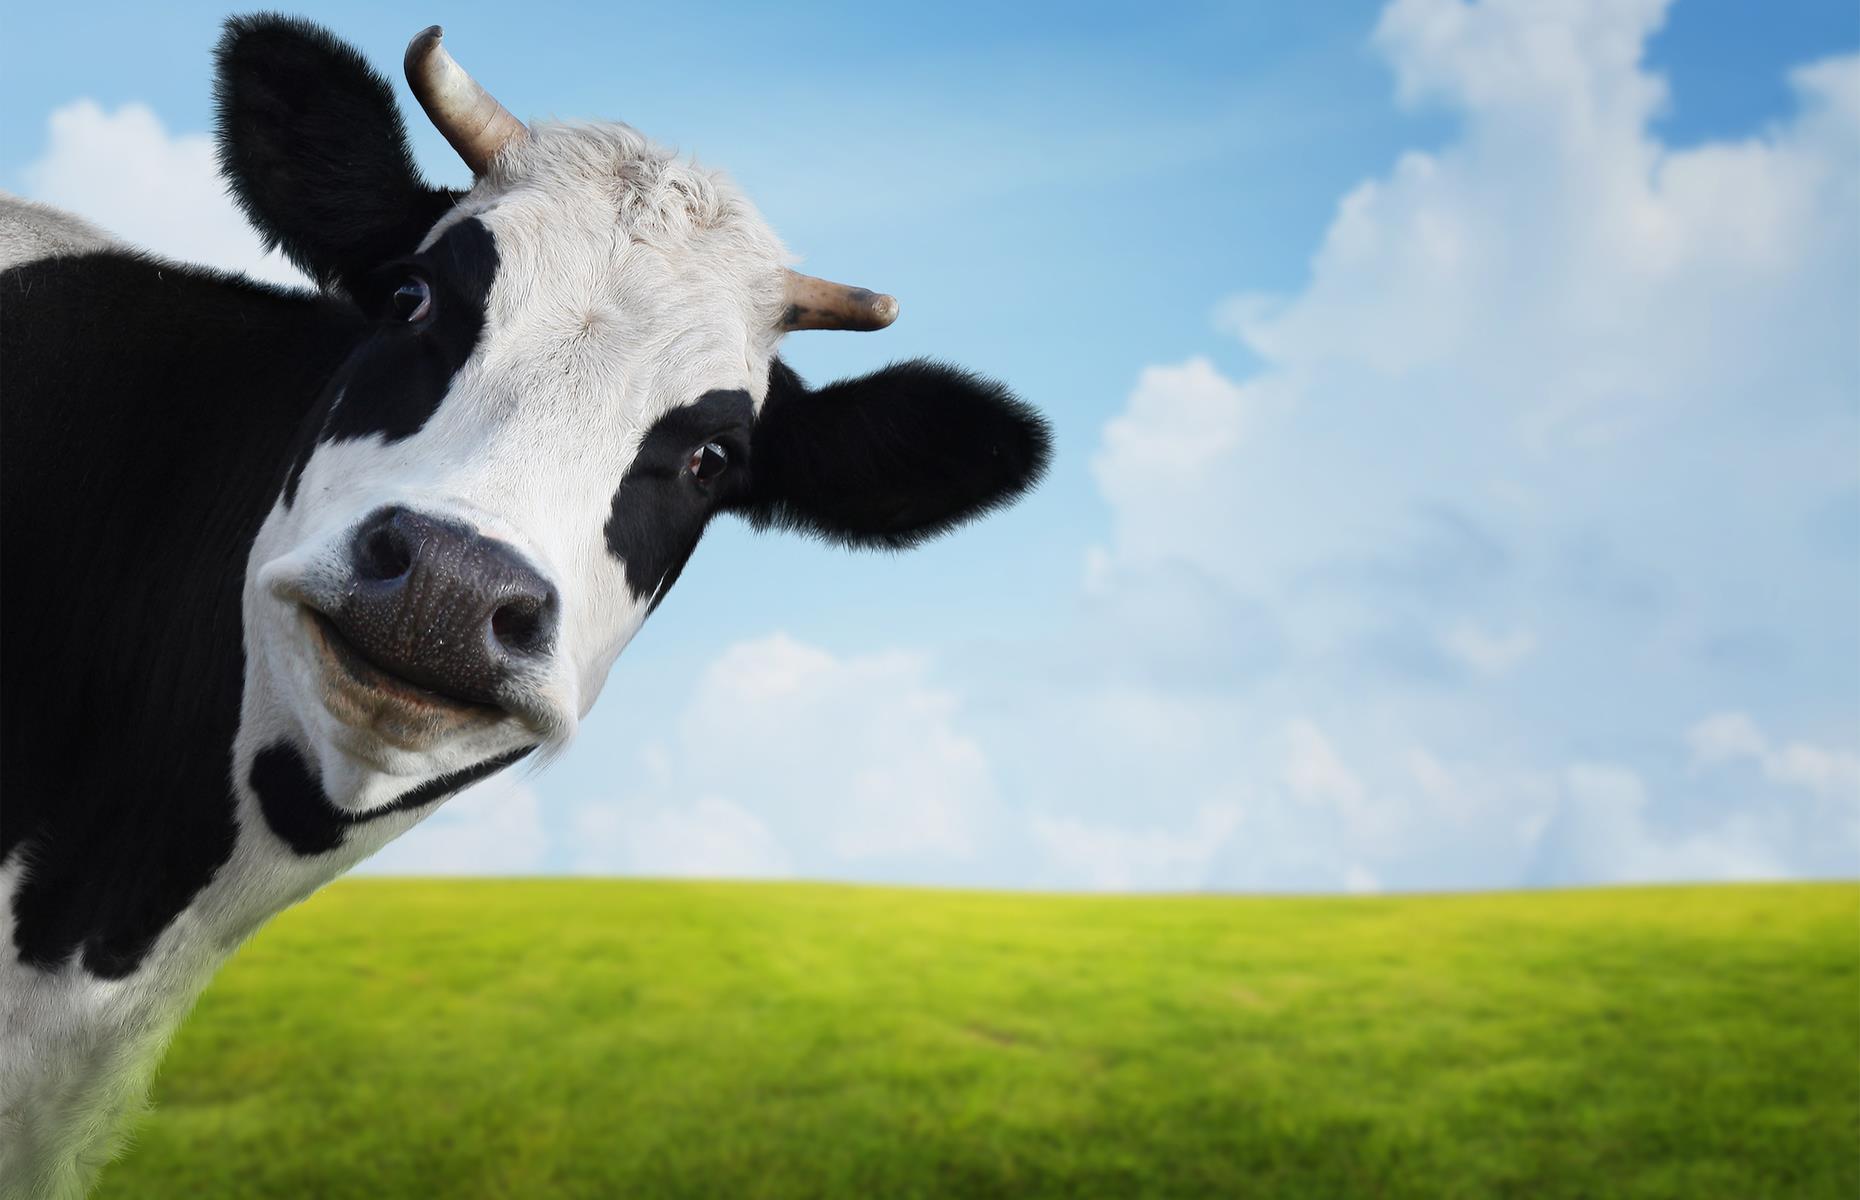 Mississippi: Cow exemption